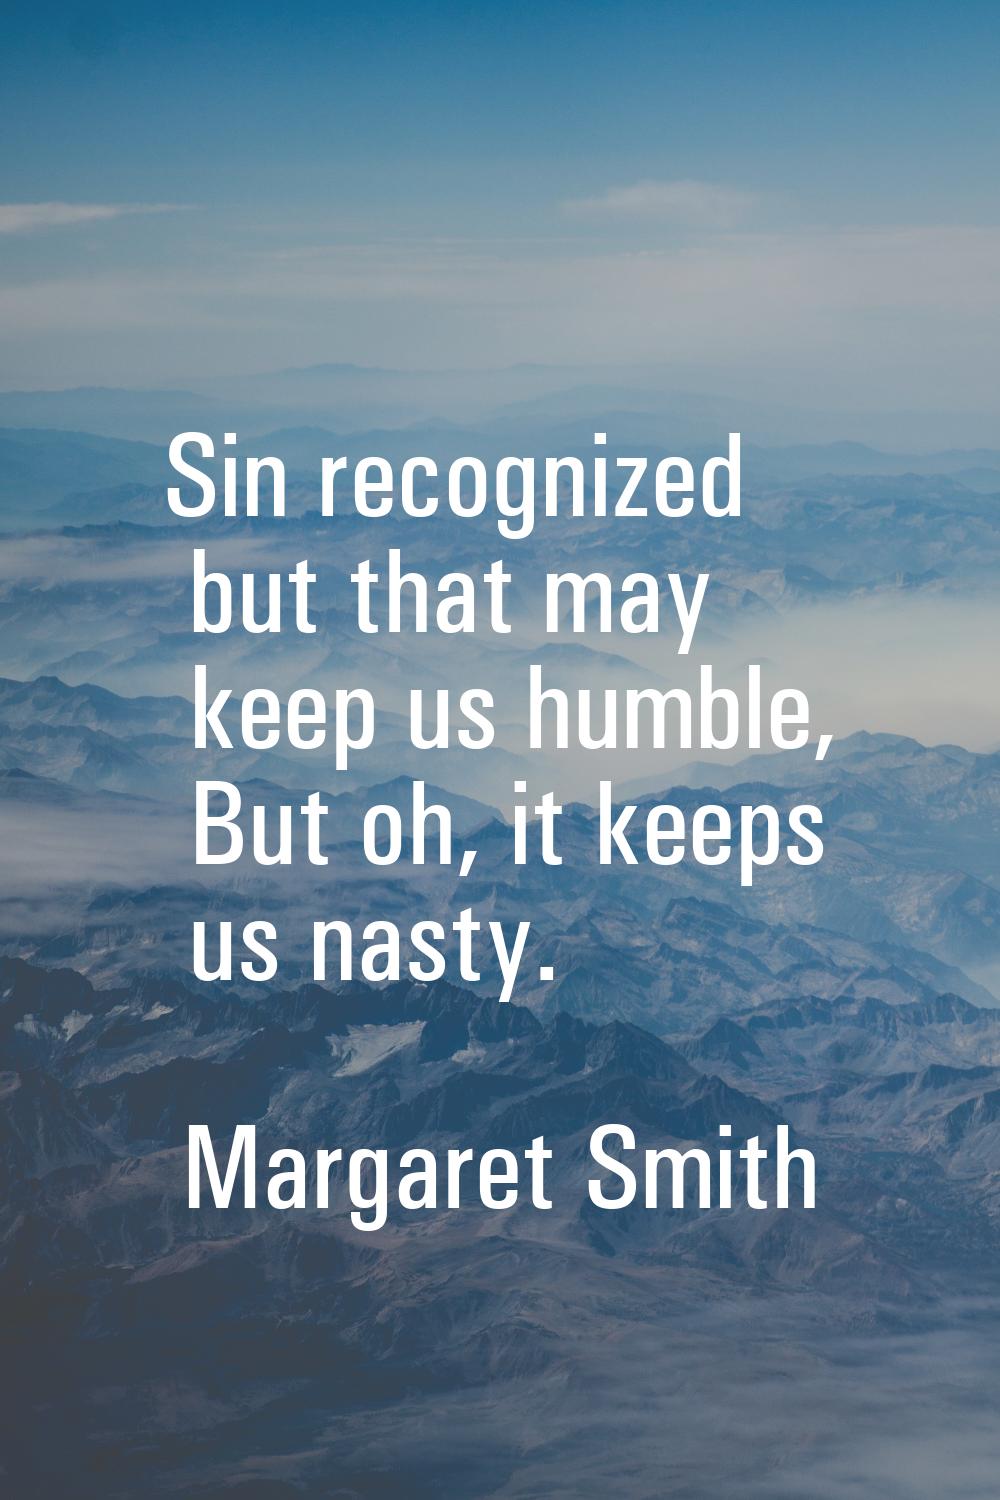 Sin recognized but that may keep us humble, But oh, it keeps us nasty.